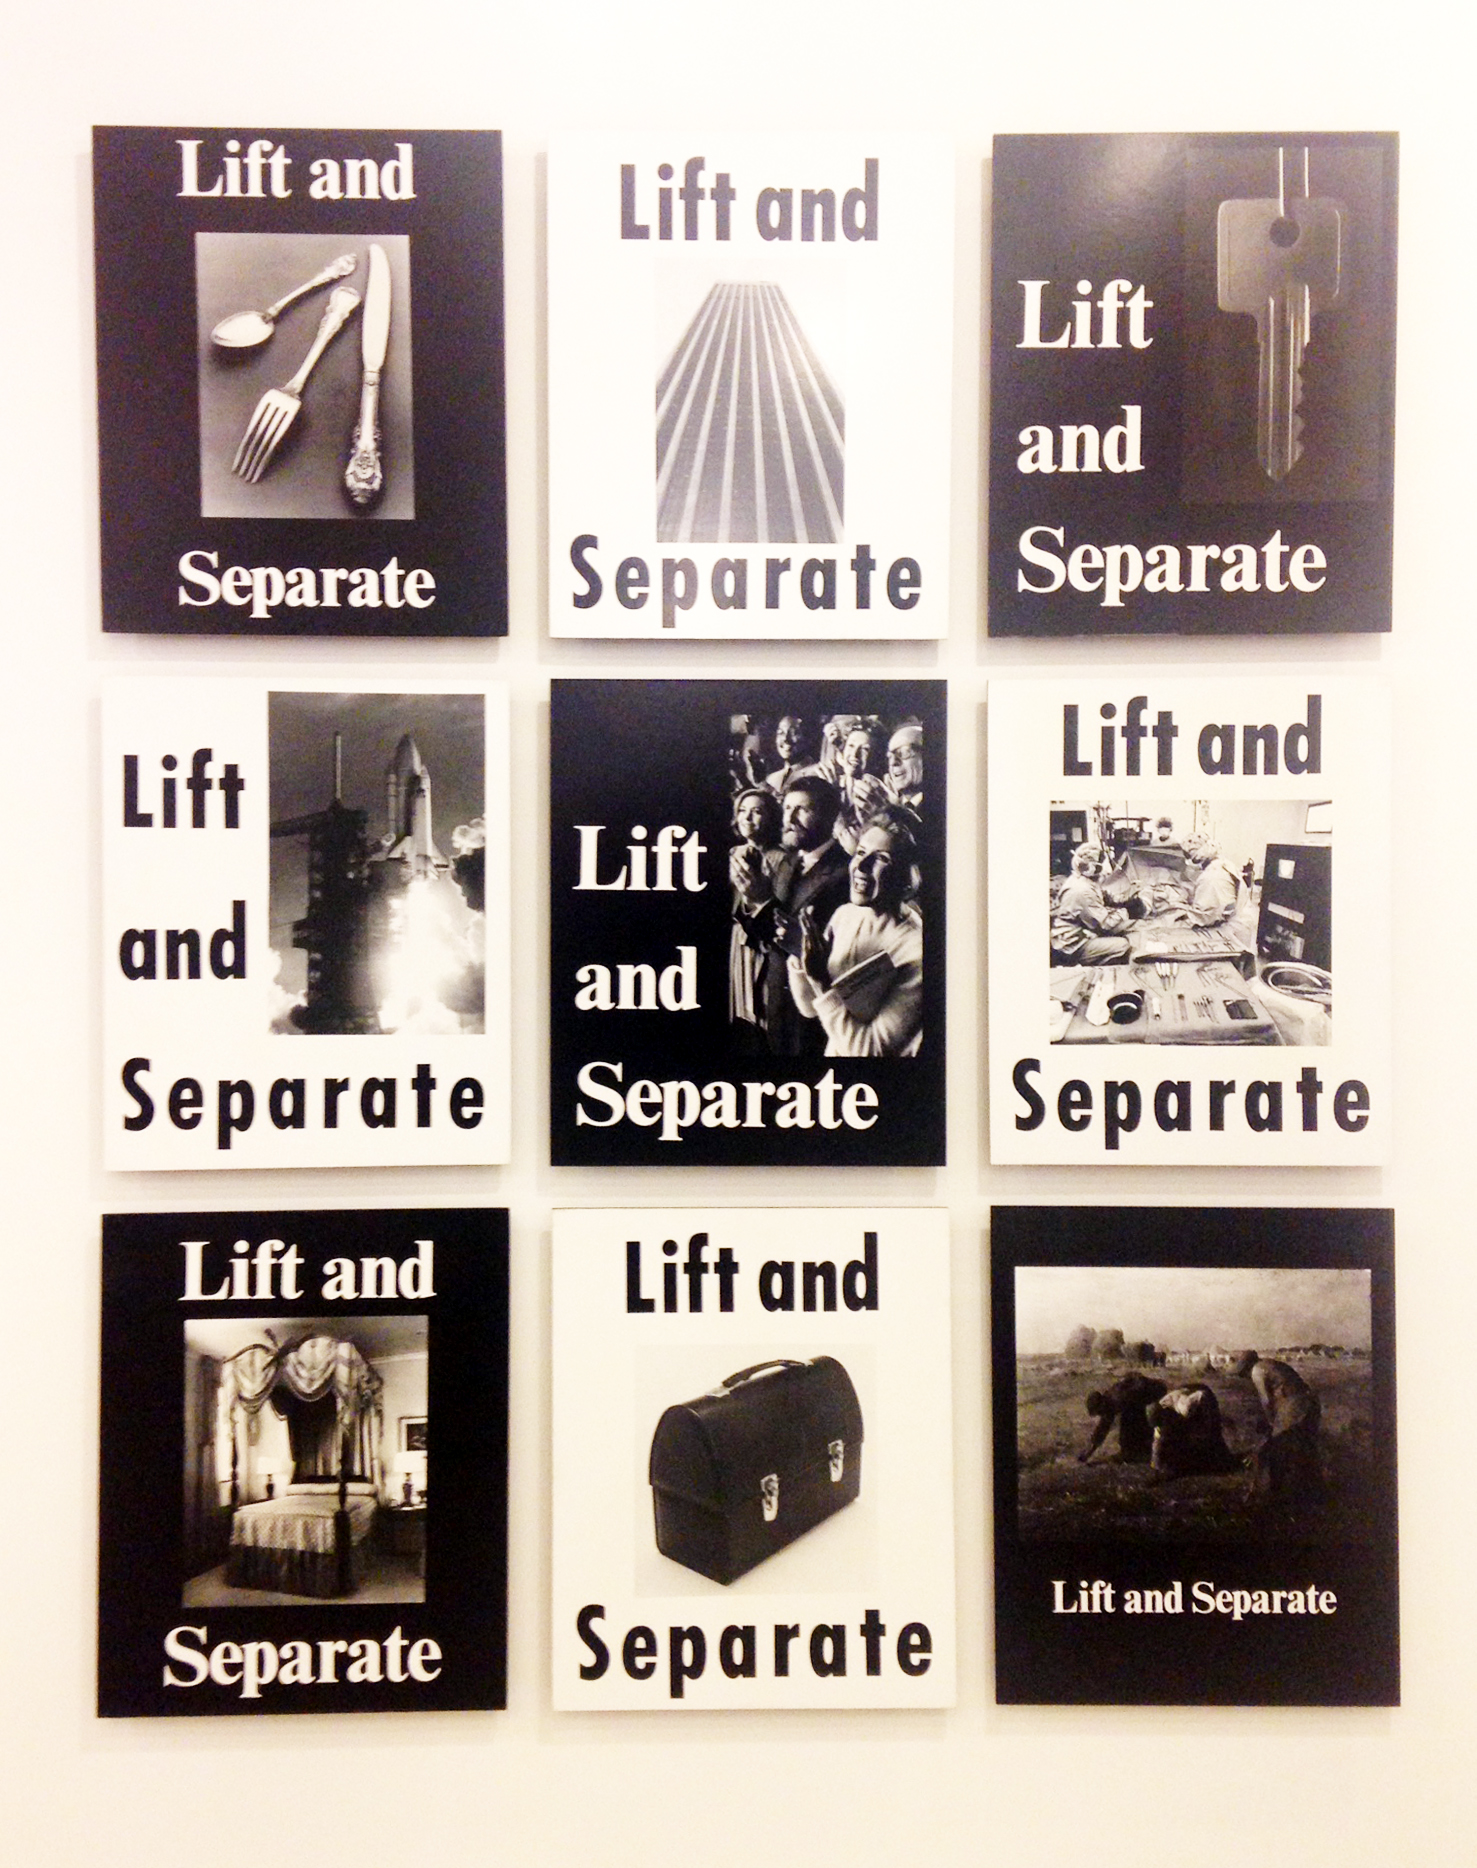 Mitchell Syrop, "Lift and Separate" (1984). Black and white photographs mounted on board. Courtesy of the artist and Croy Nielsen, Berlin